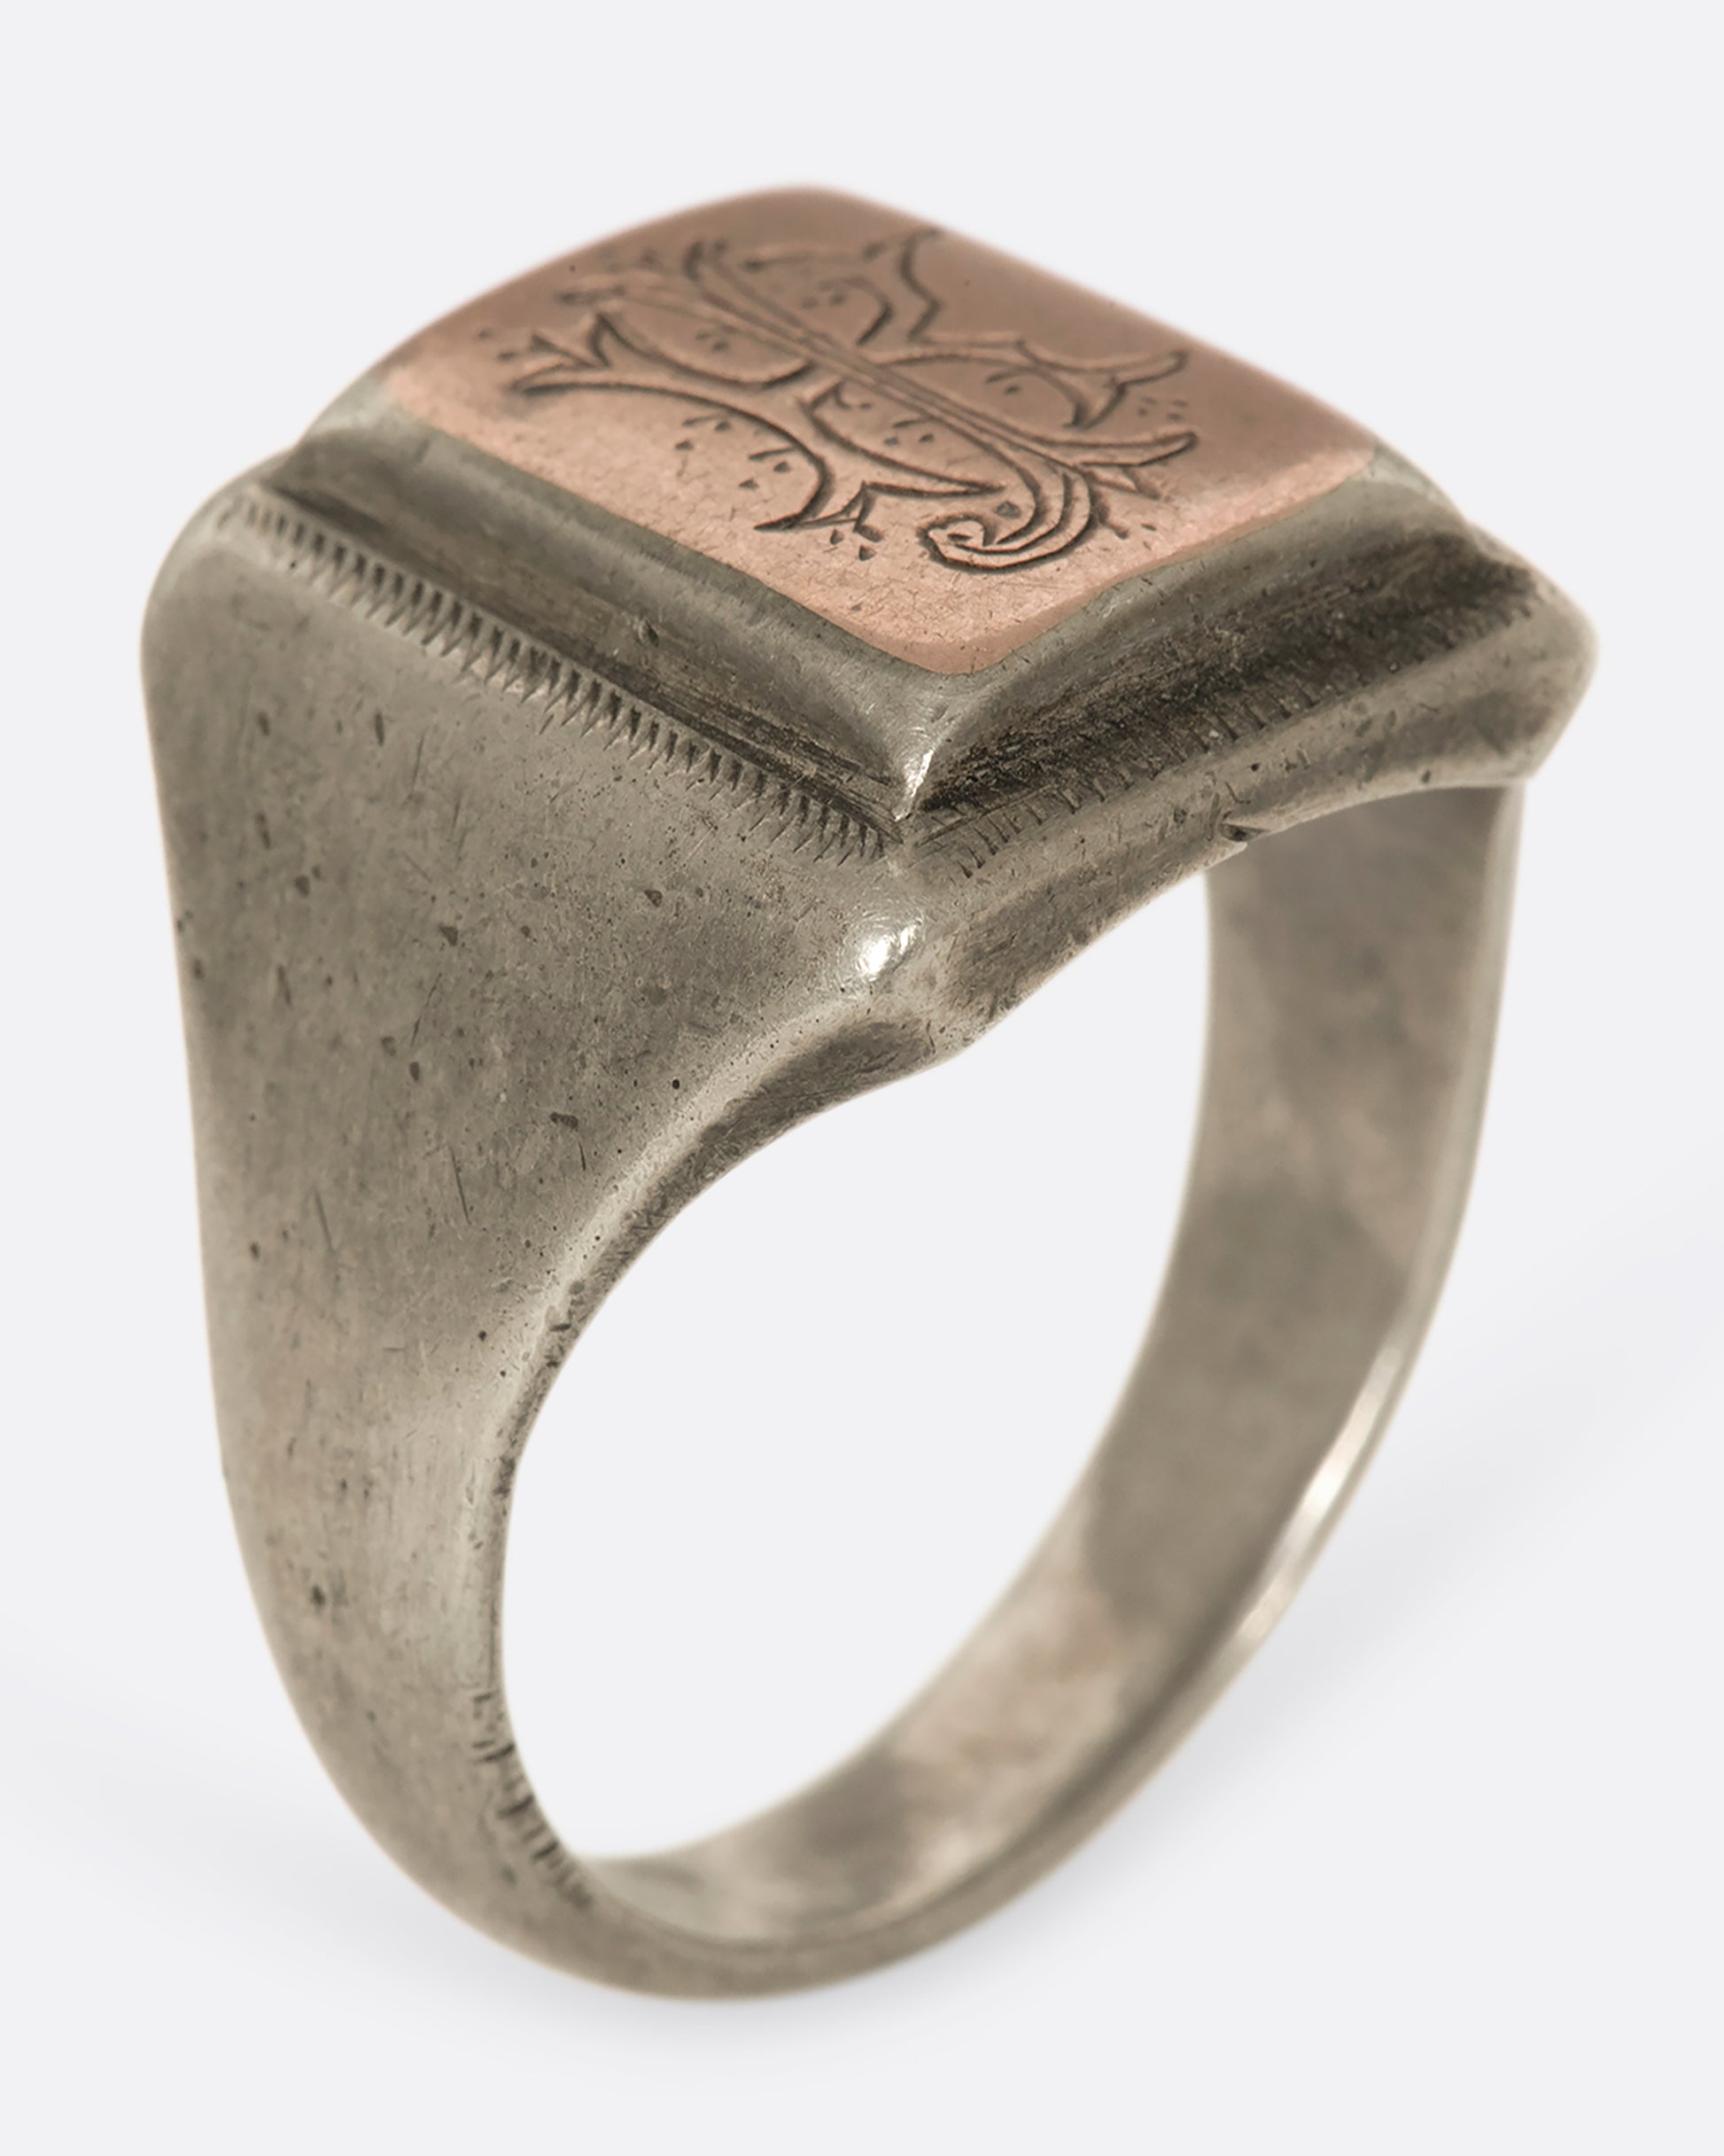 This square-faced 1940s sterling silver signet ring has a copper face with the initials RJ elegantly engraved. Gift accordingly. 